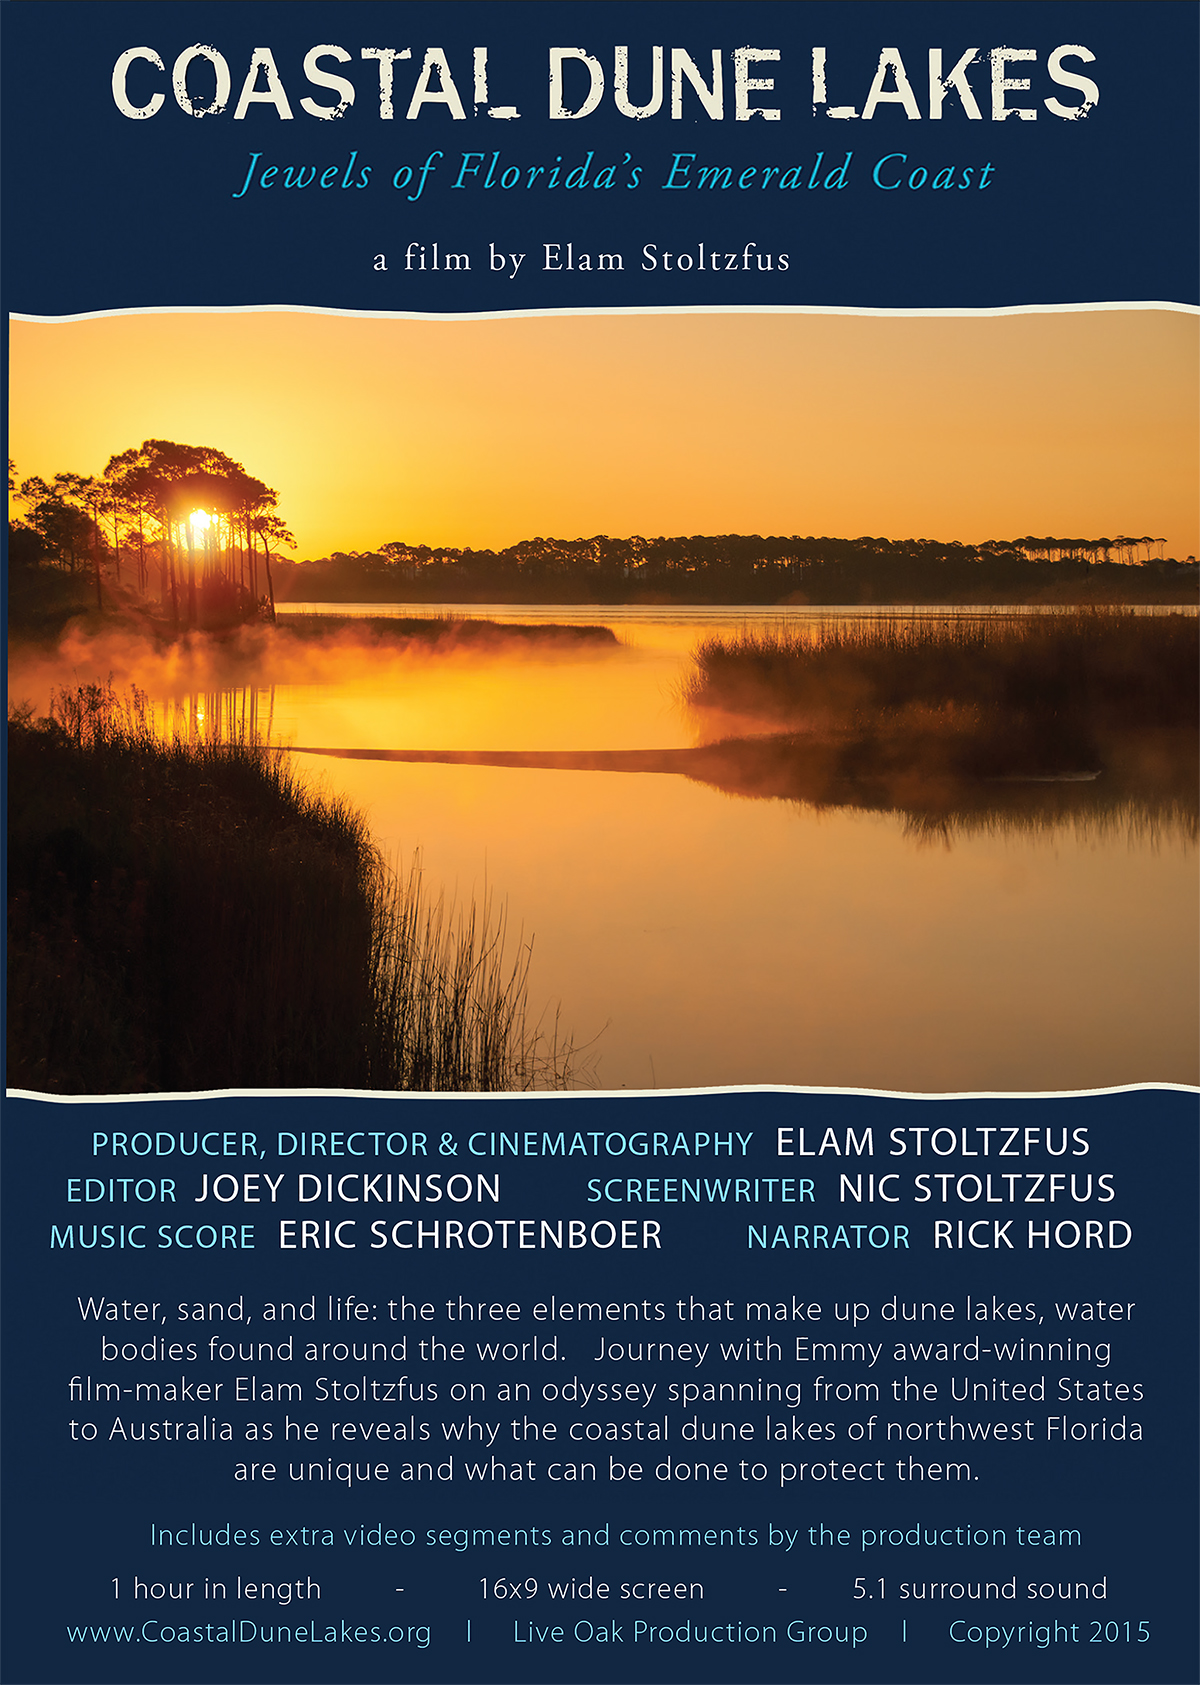 Coastal Dune Lakes: Jewels of Florida's Emerald Coast, poster and DVD cover.